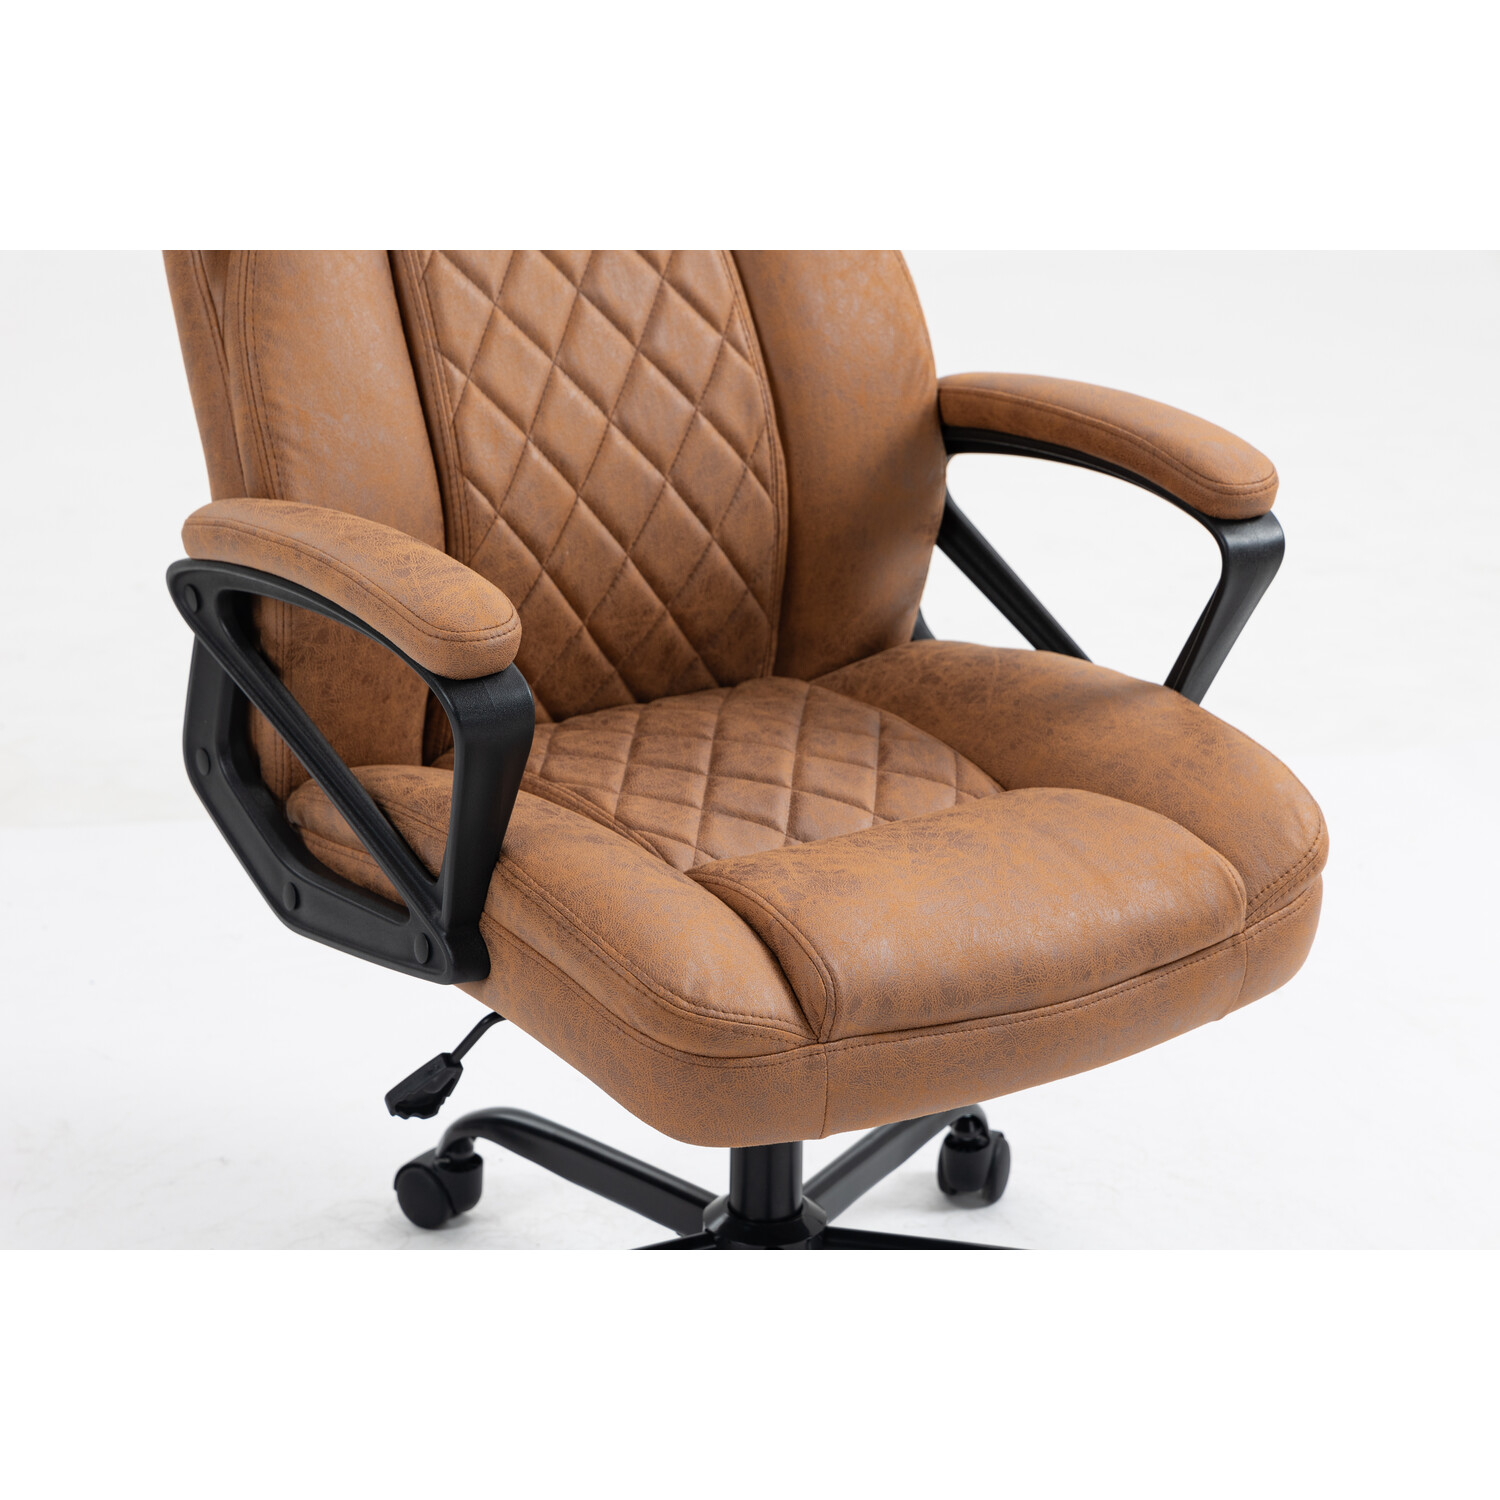 Suffolk High Back Office Chair - Brown Image 3